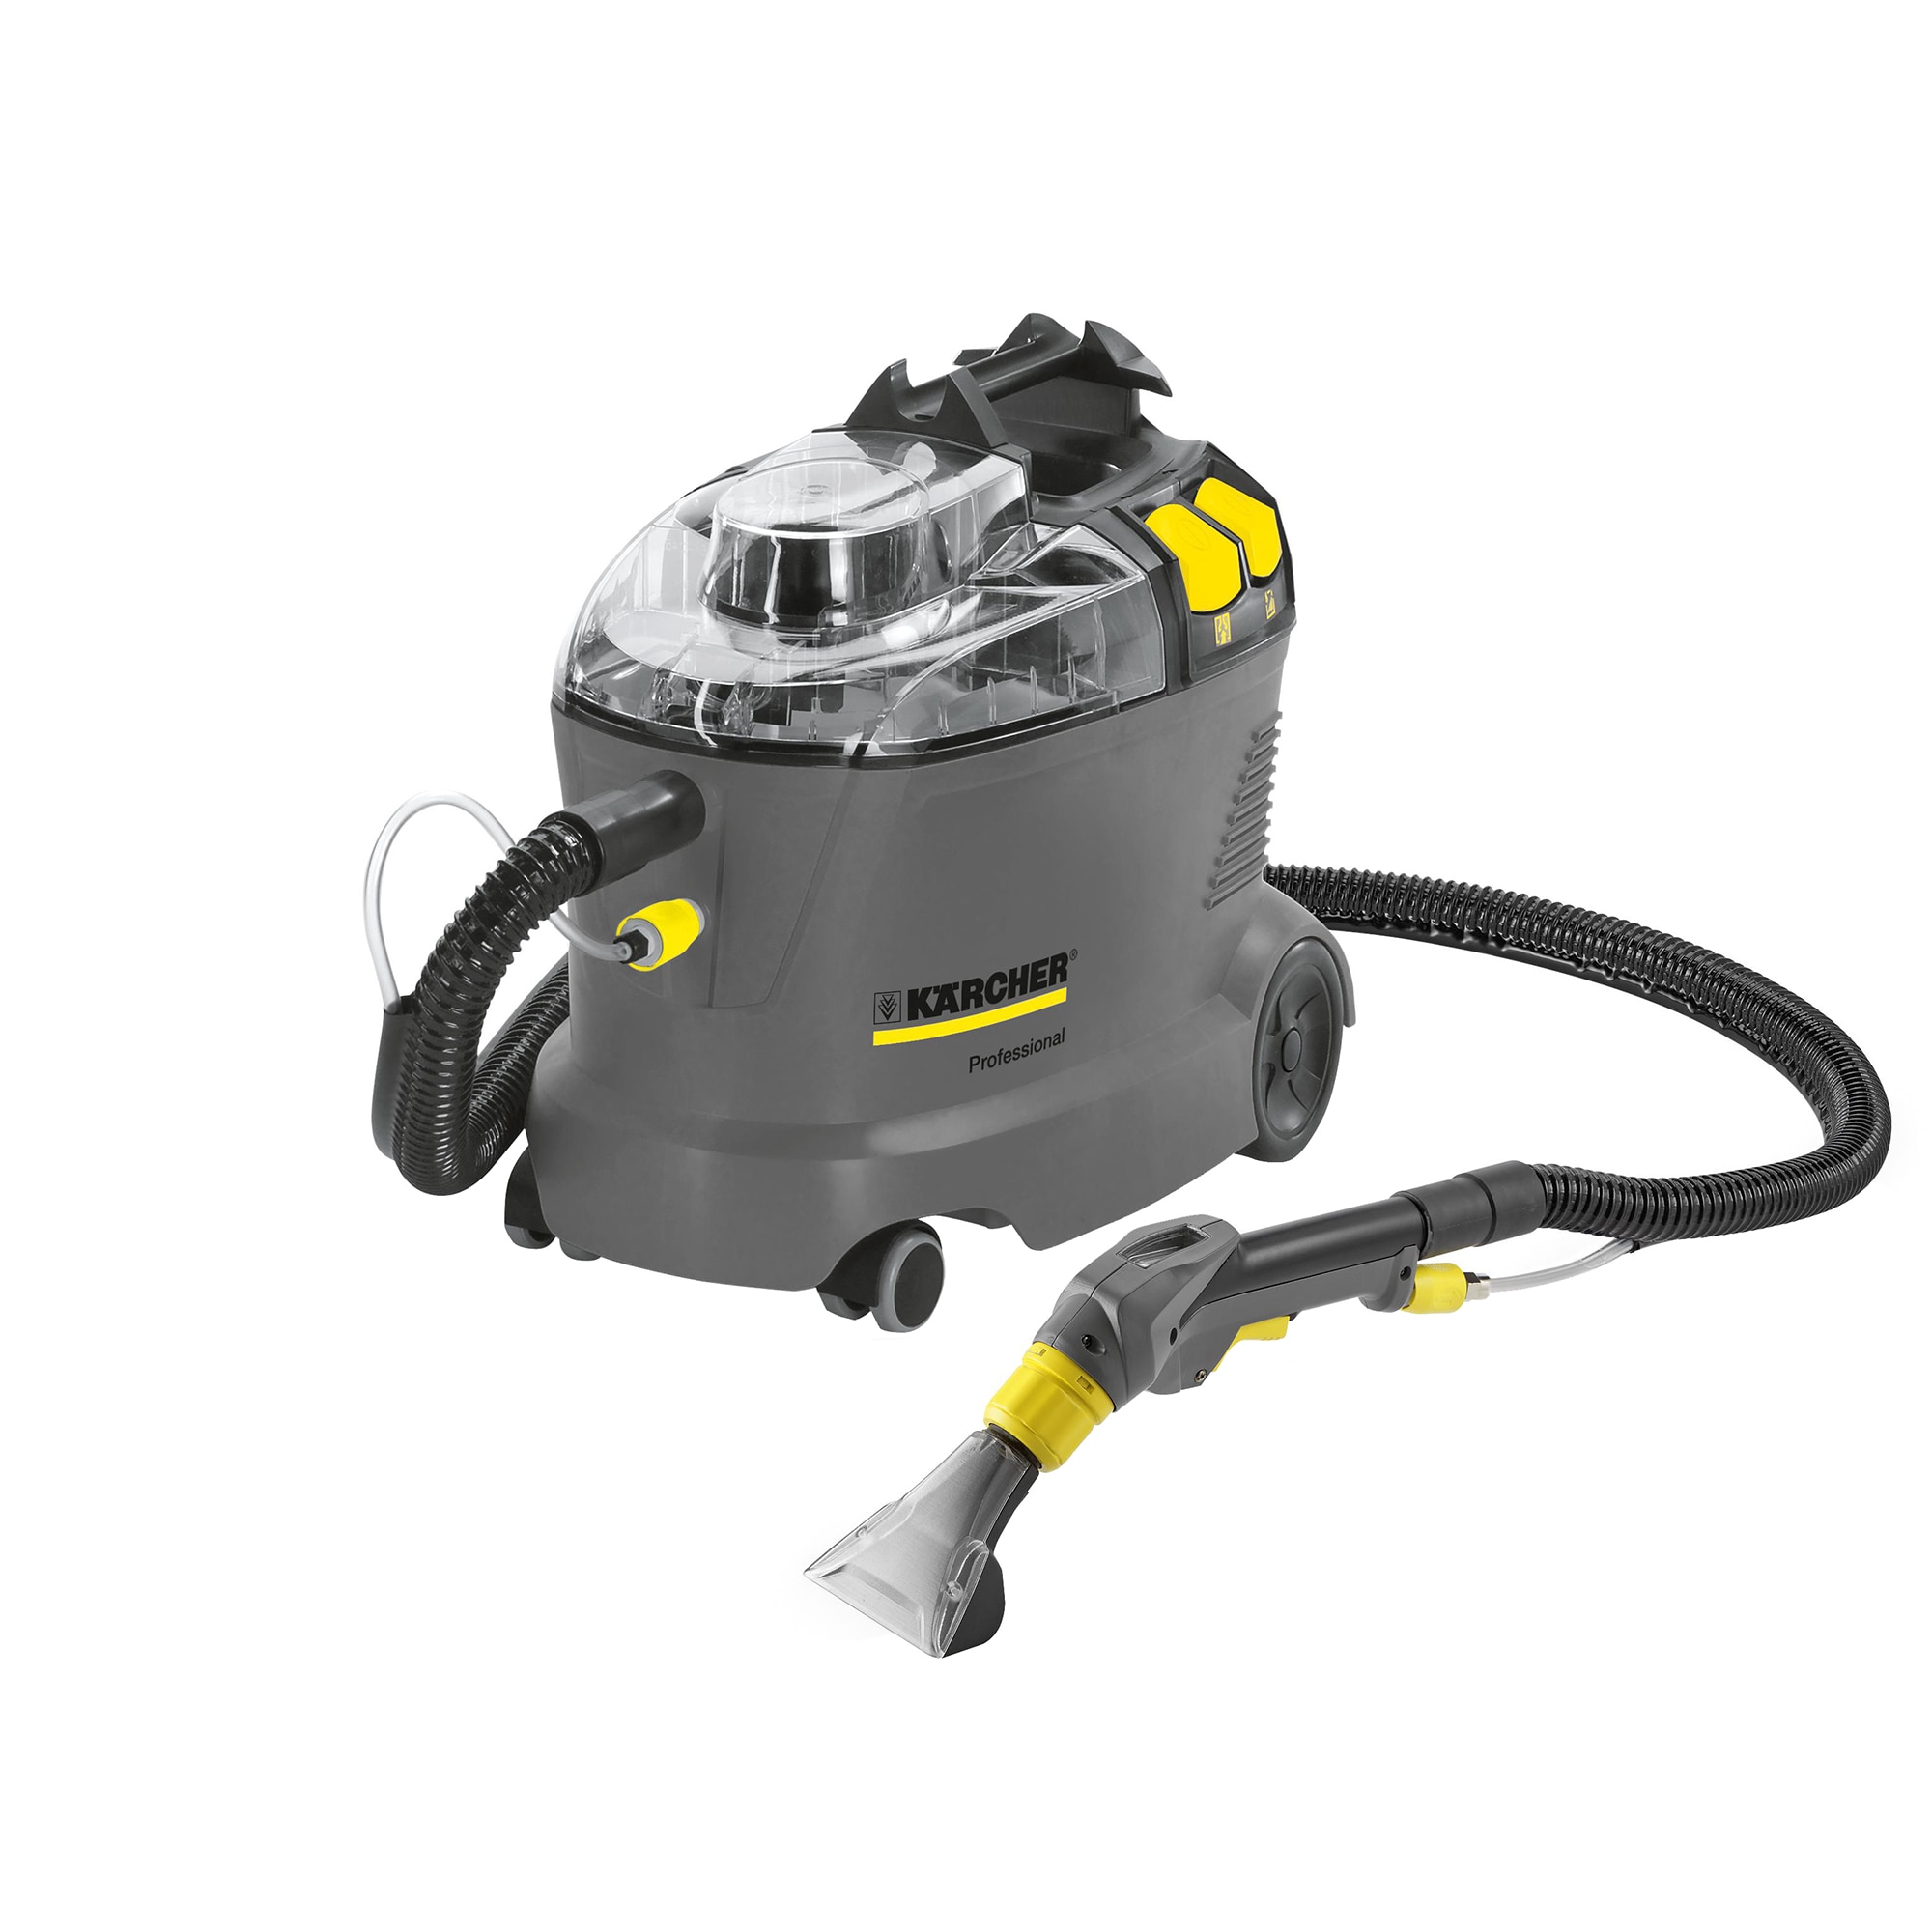 Agnes Gray Beyond Recognition Aspirator cu spalare Profesional Karcher Puzzi 8/1, 1200 W, 7l, Sistem  injectie-extractie, Gri - eMAG.ro